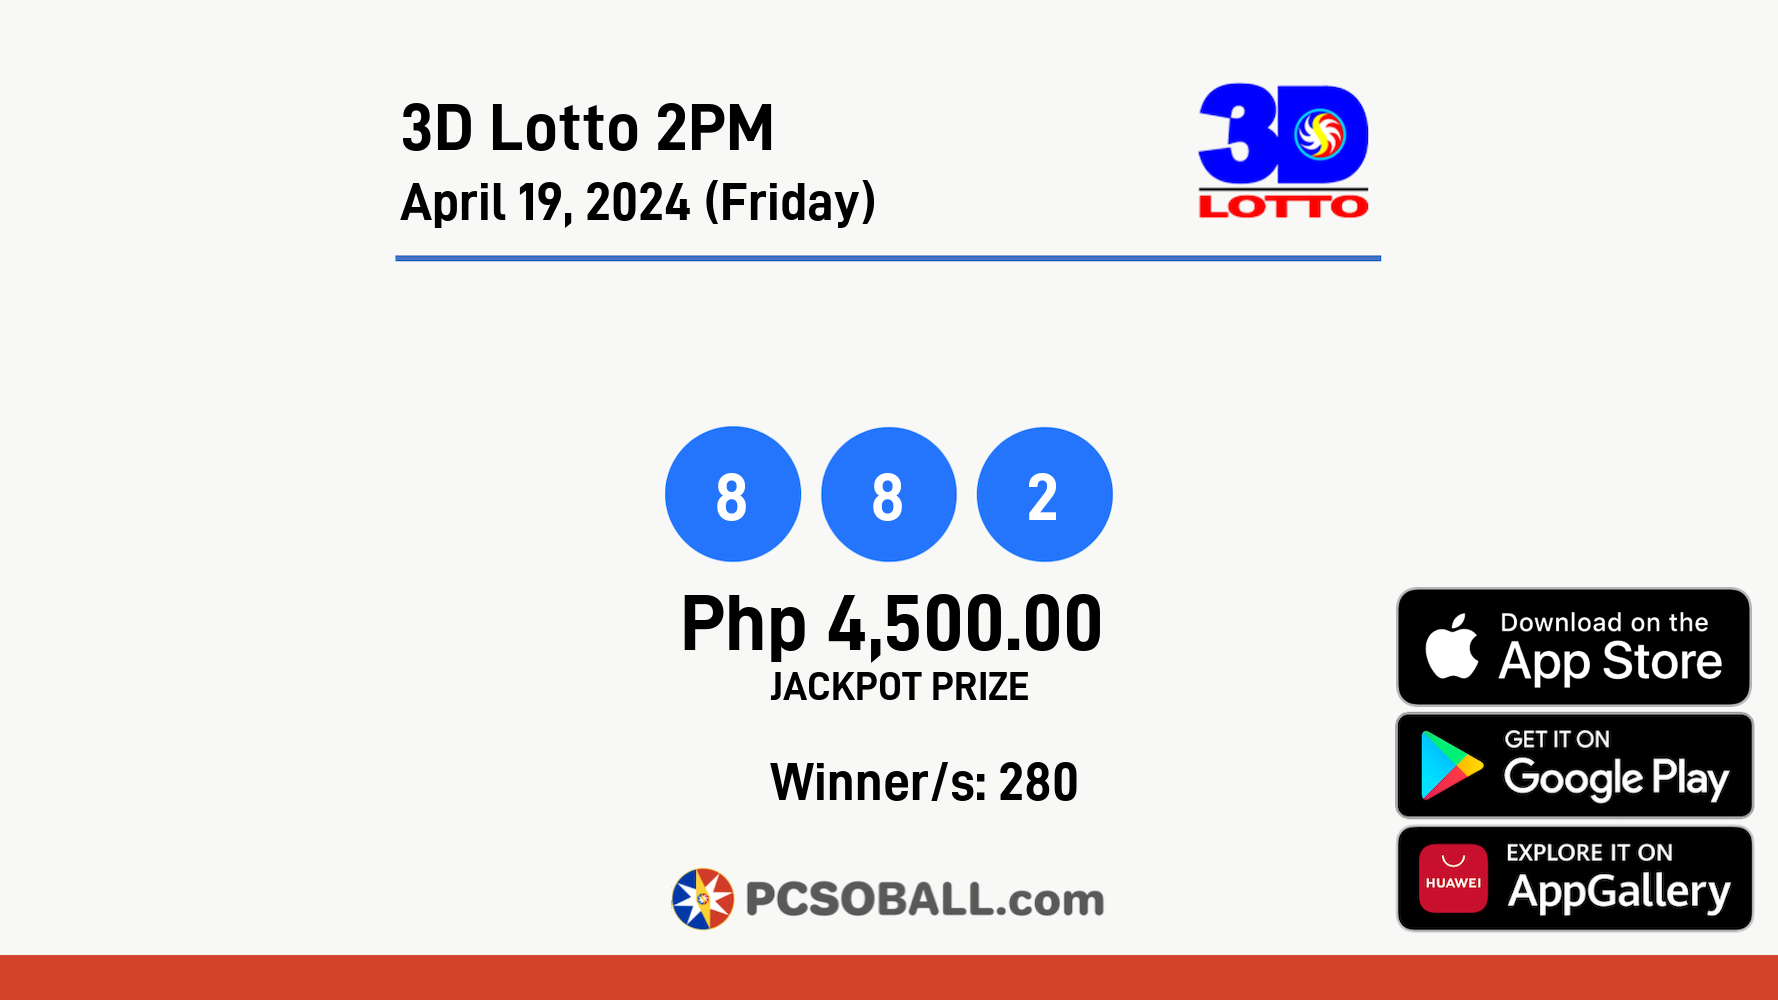 3D Lotto 2PM April 19, 2024 (Friday) Result